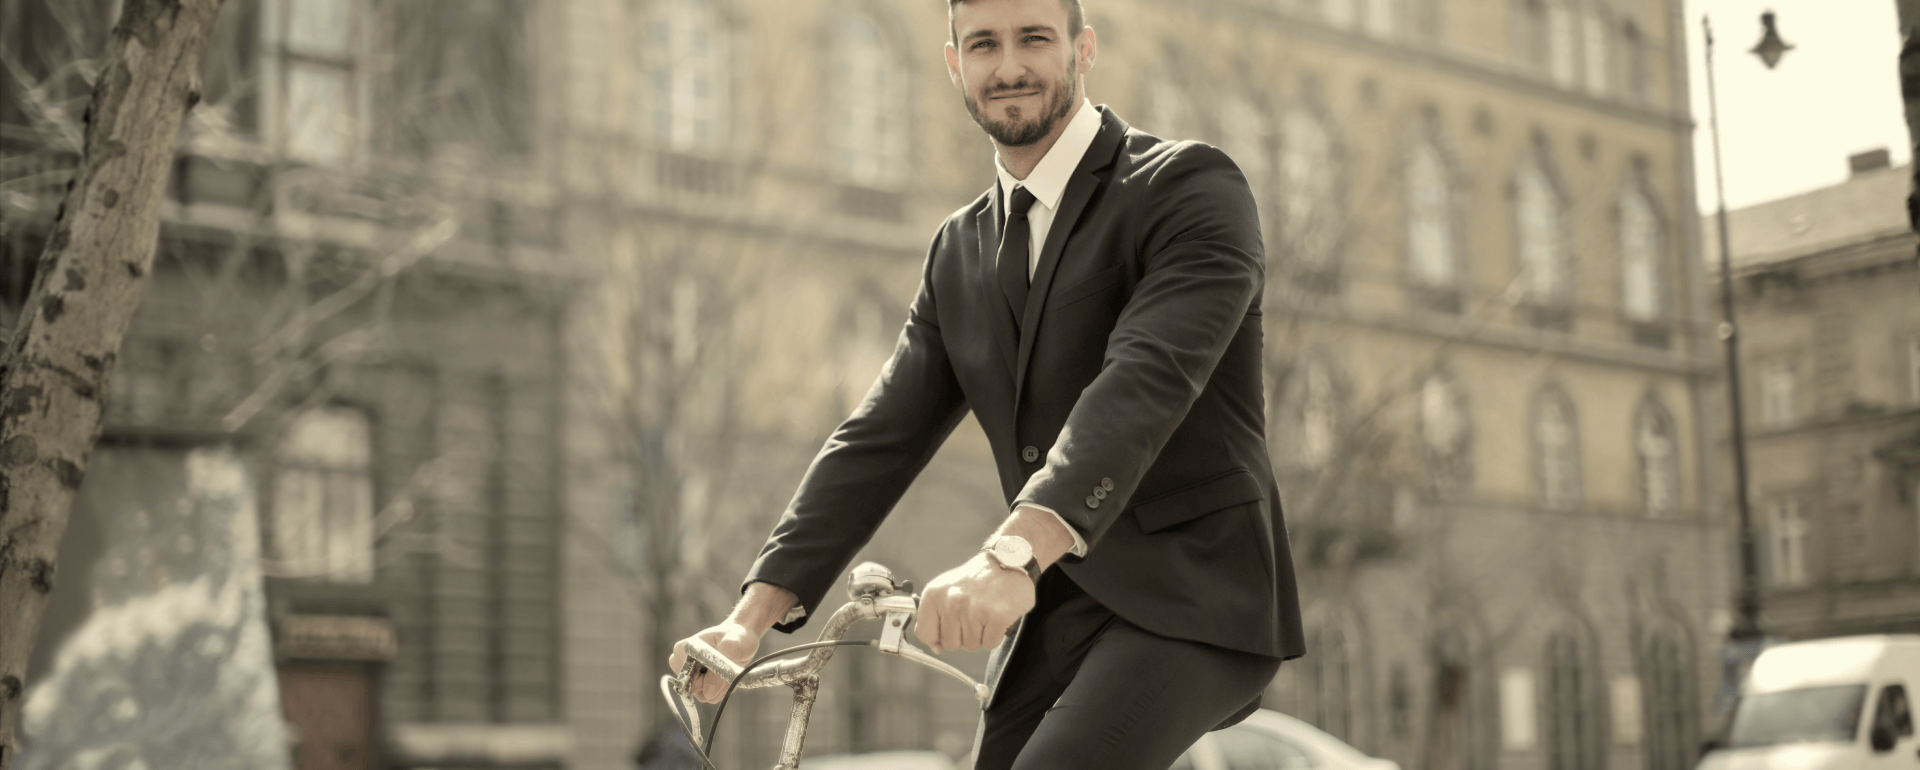 Ons business-to-business-fietsplan